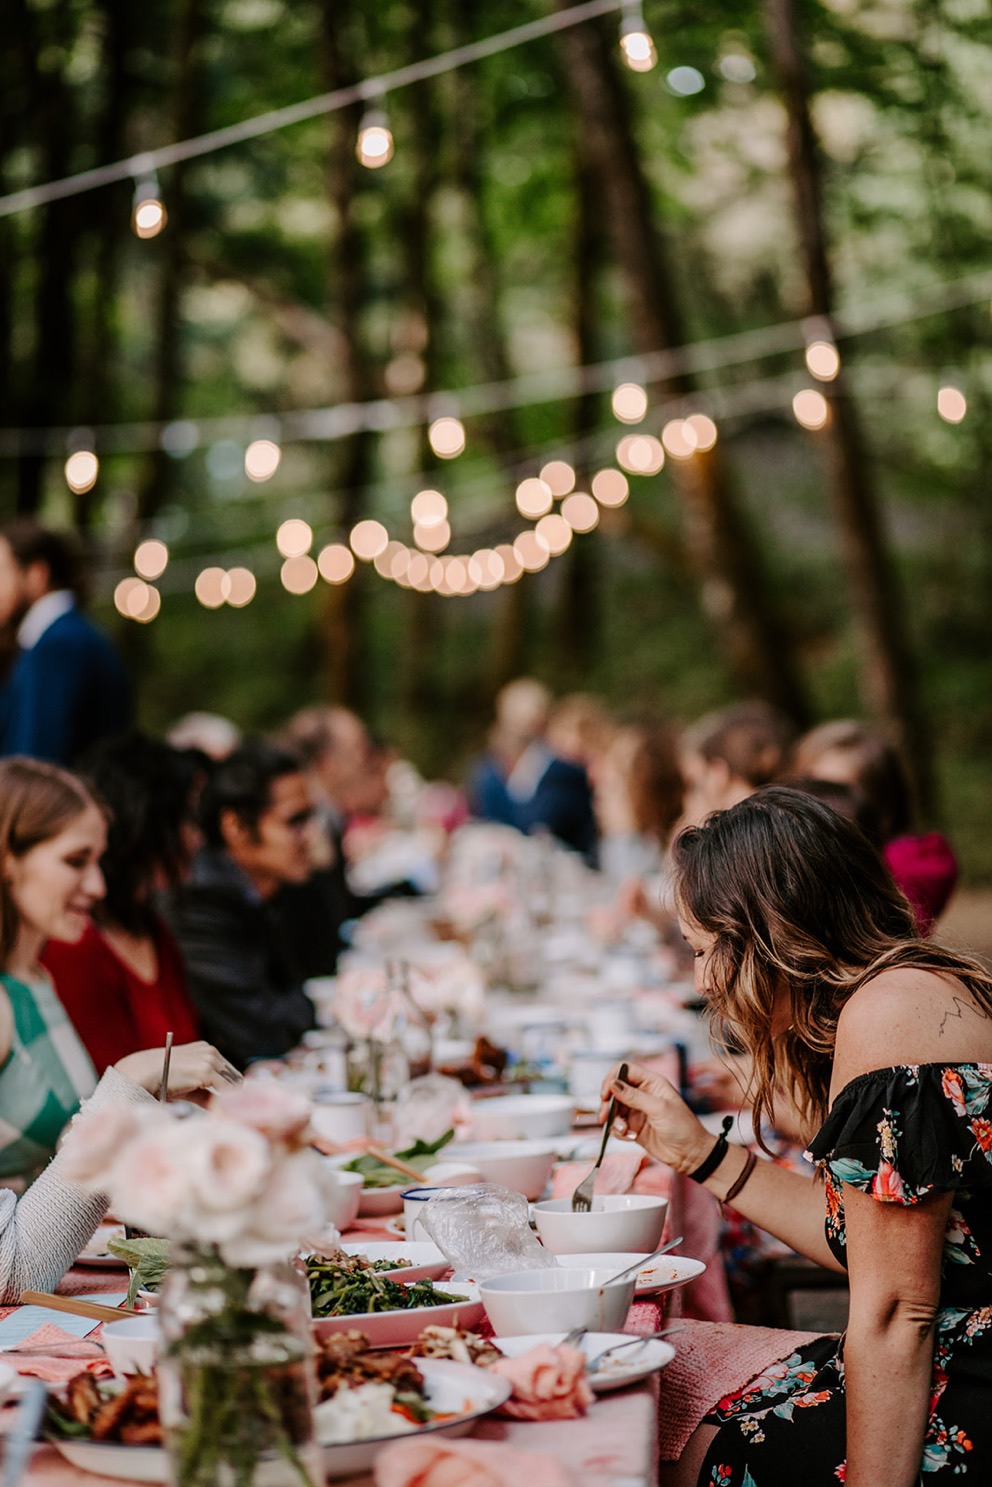 guests seated at long table in forest under patio lights during outdoor wedding reception